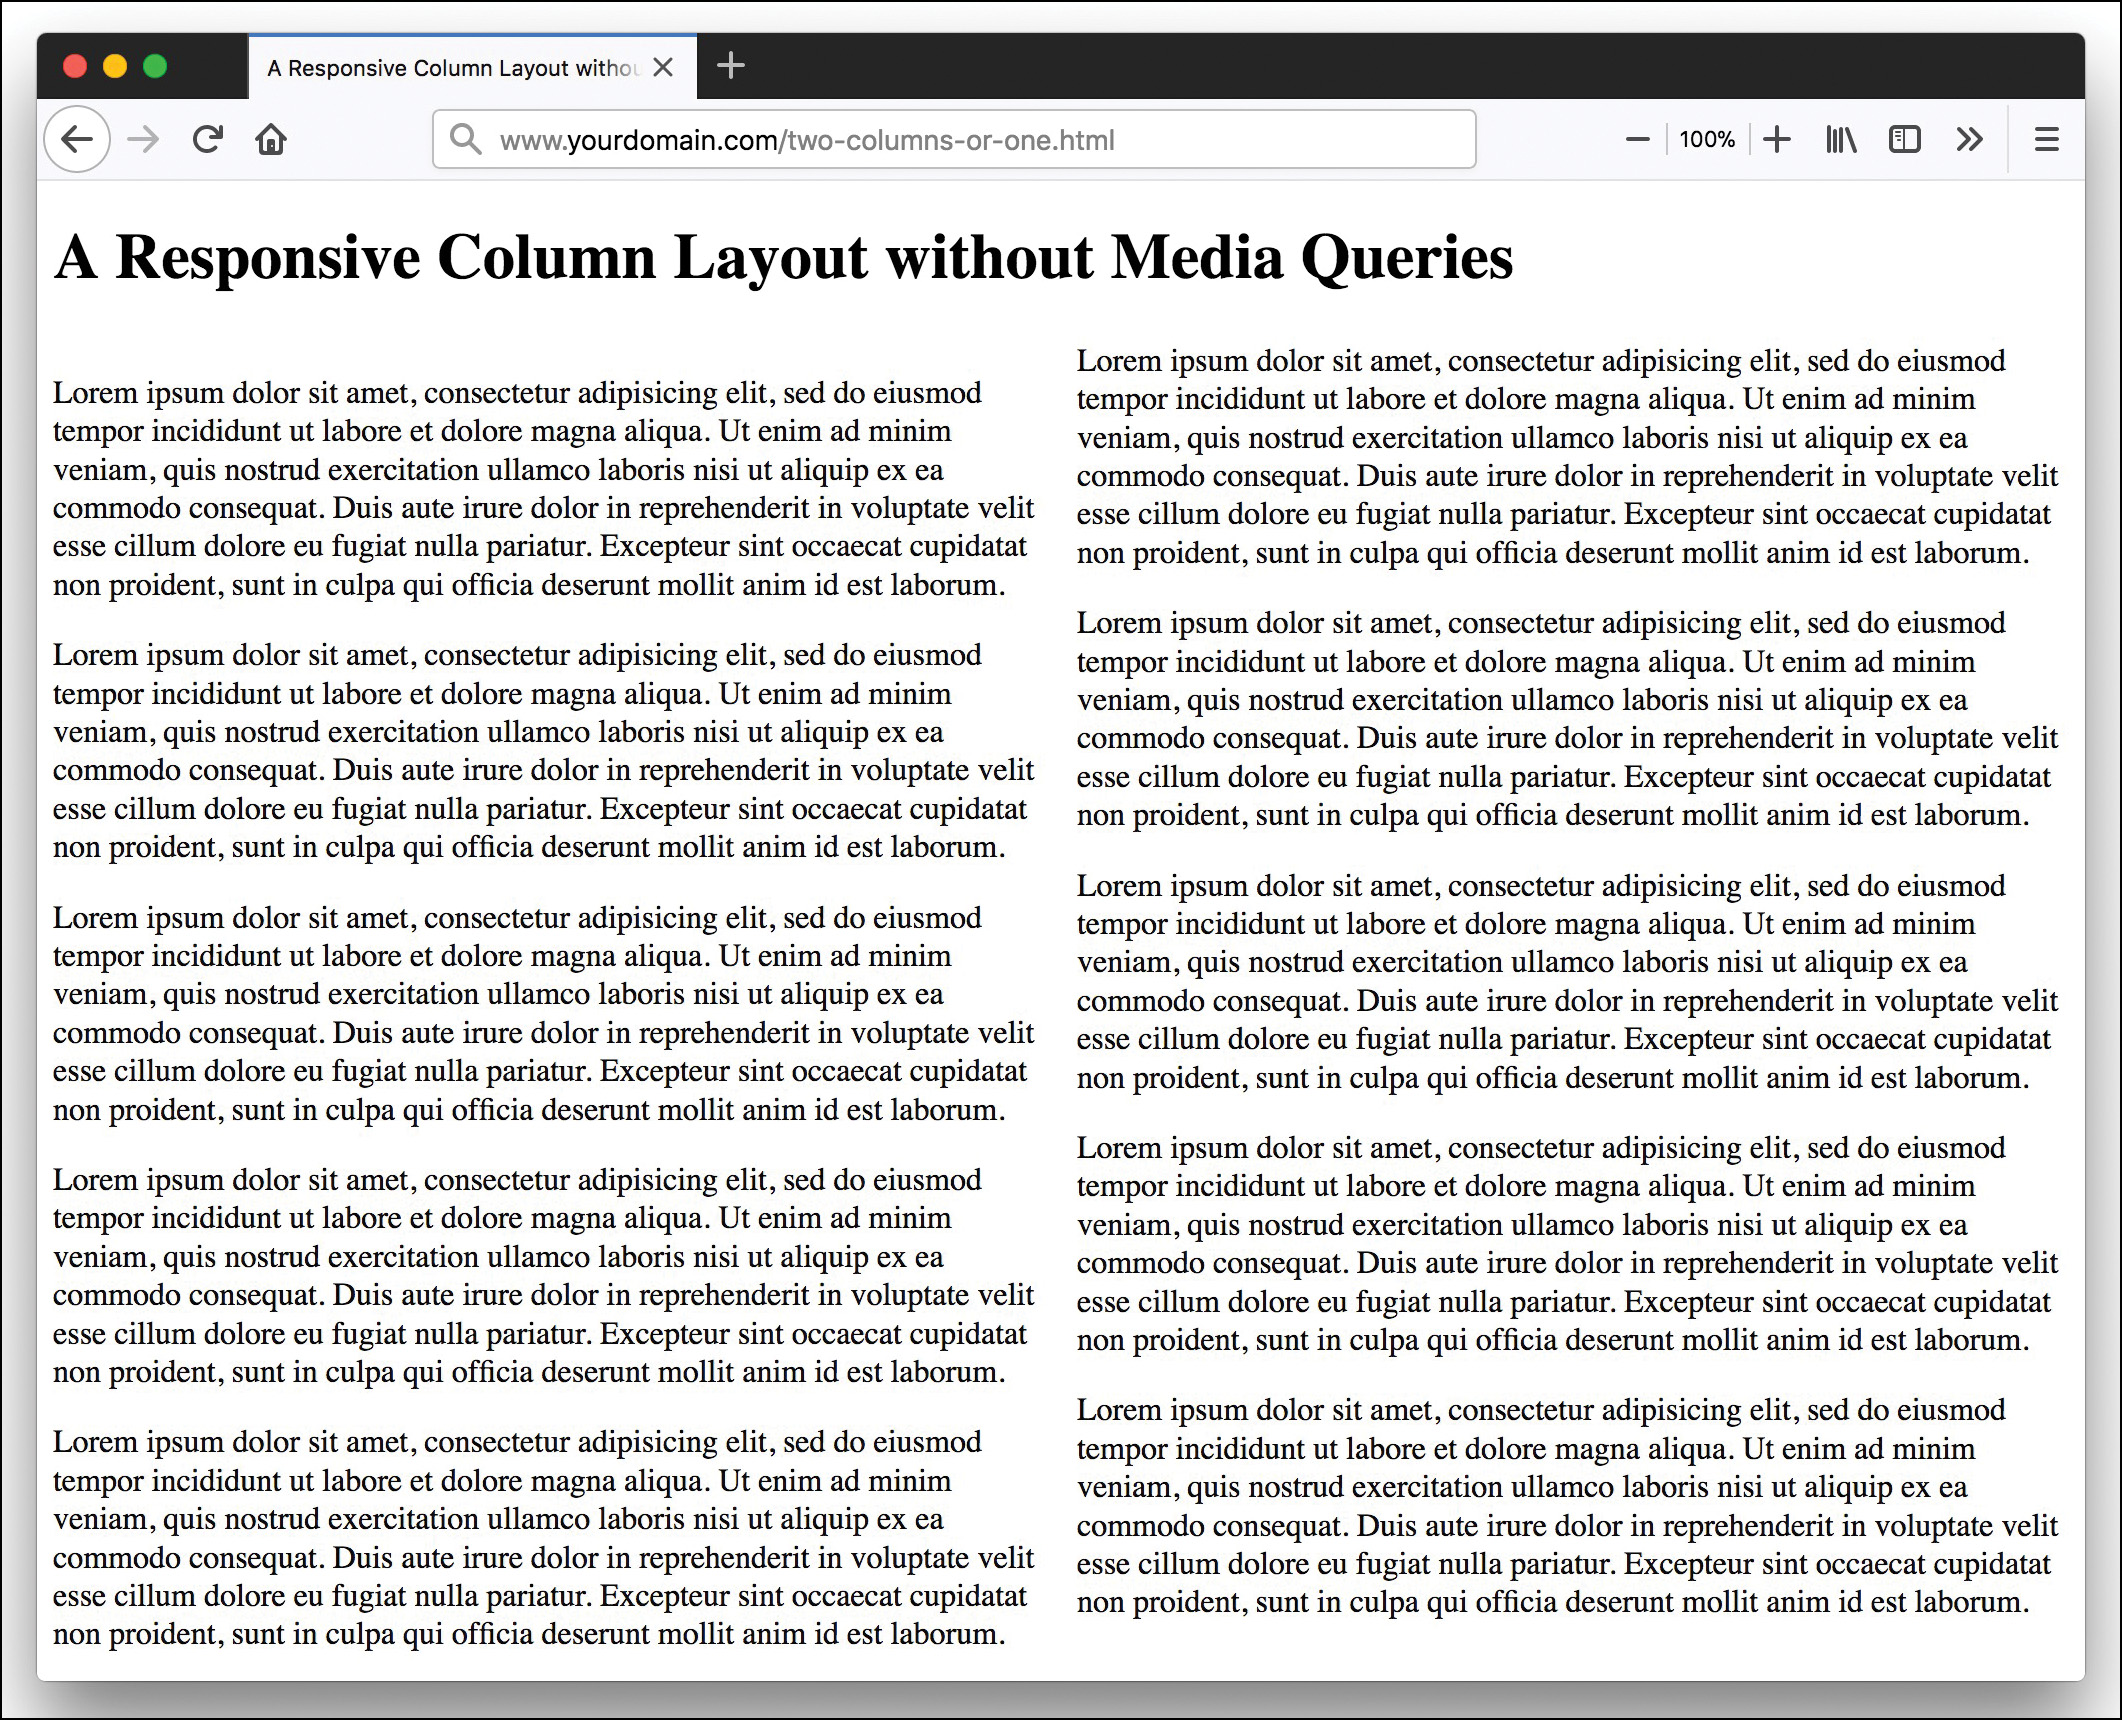 A screenshot shows text rendered as two columns in a browser with a bigger screen. The two columns of text occupy the entire browser window.